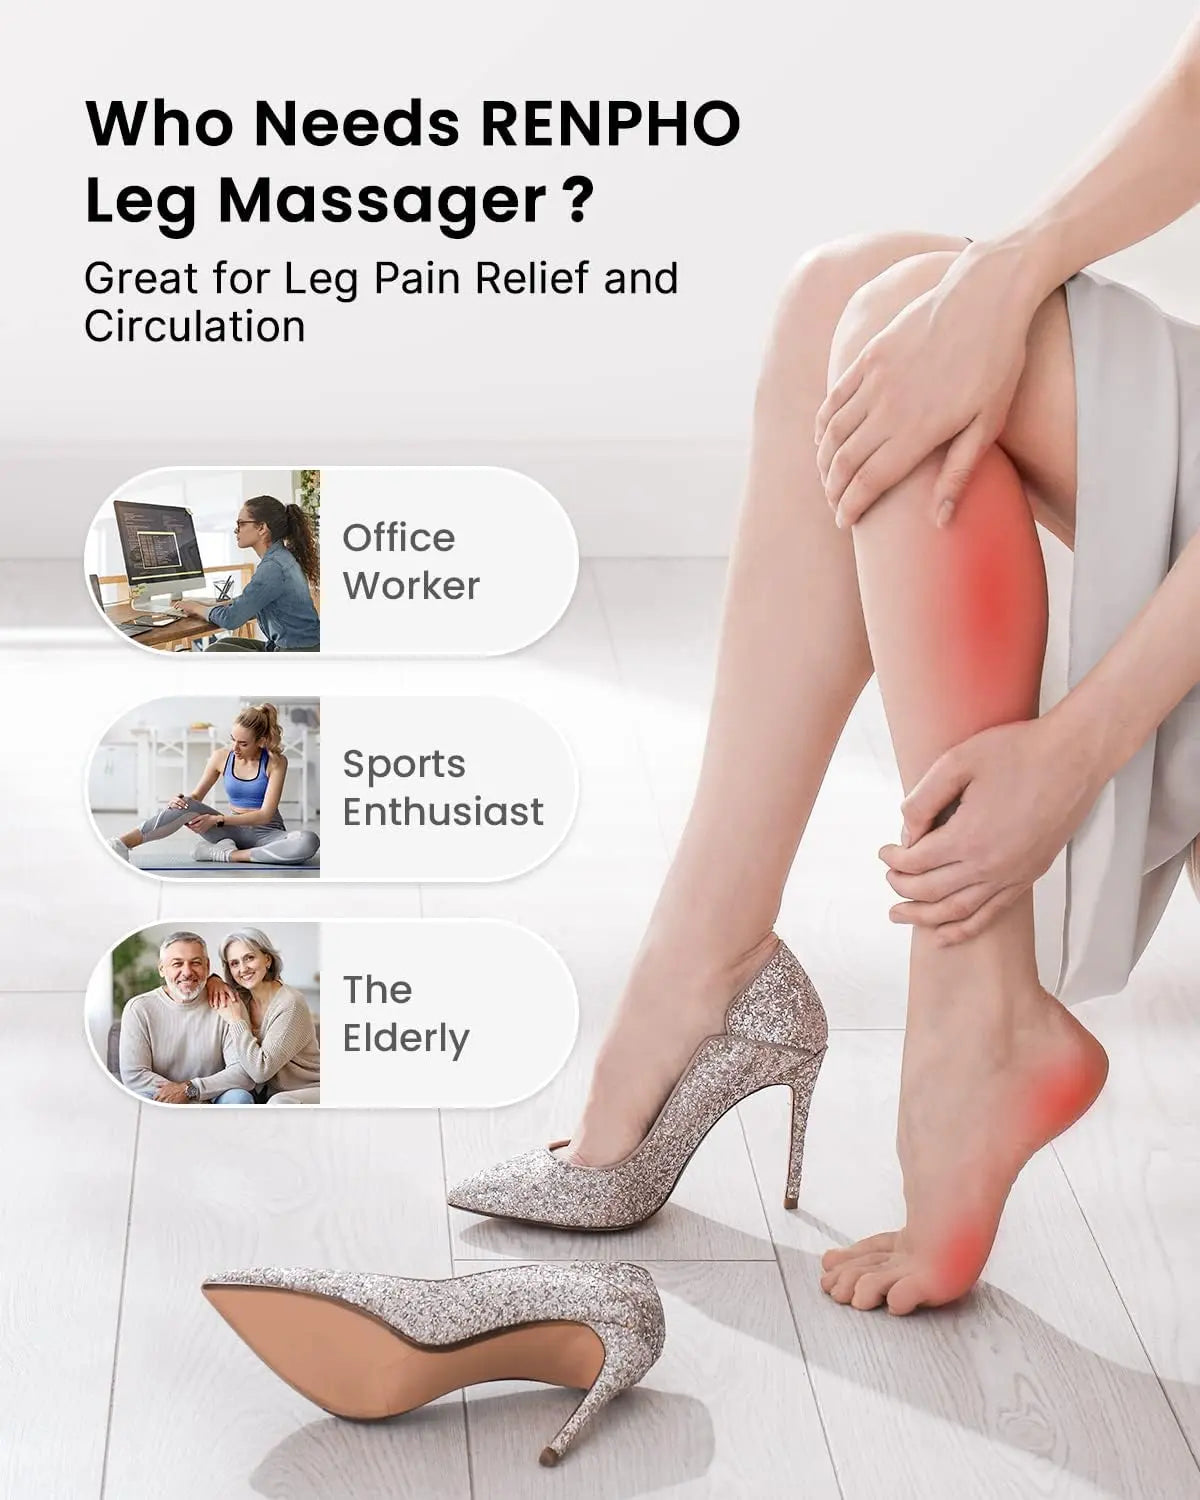 A person sitting barefoot on a bed has removed glitter high heels and is massaging their lower leg, highlighted in red to indicate pain. The text "Who Needs Renpho EU Aeria Ultimate Thermal Full Leg Massager? Great for Leg Pain Relief, Circulation & Tension Relief" lists "Office Worker, Sports Enthusiast, The Elderly" as target users.